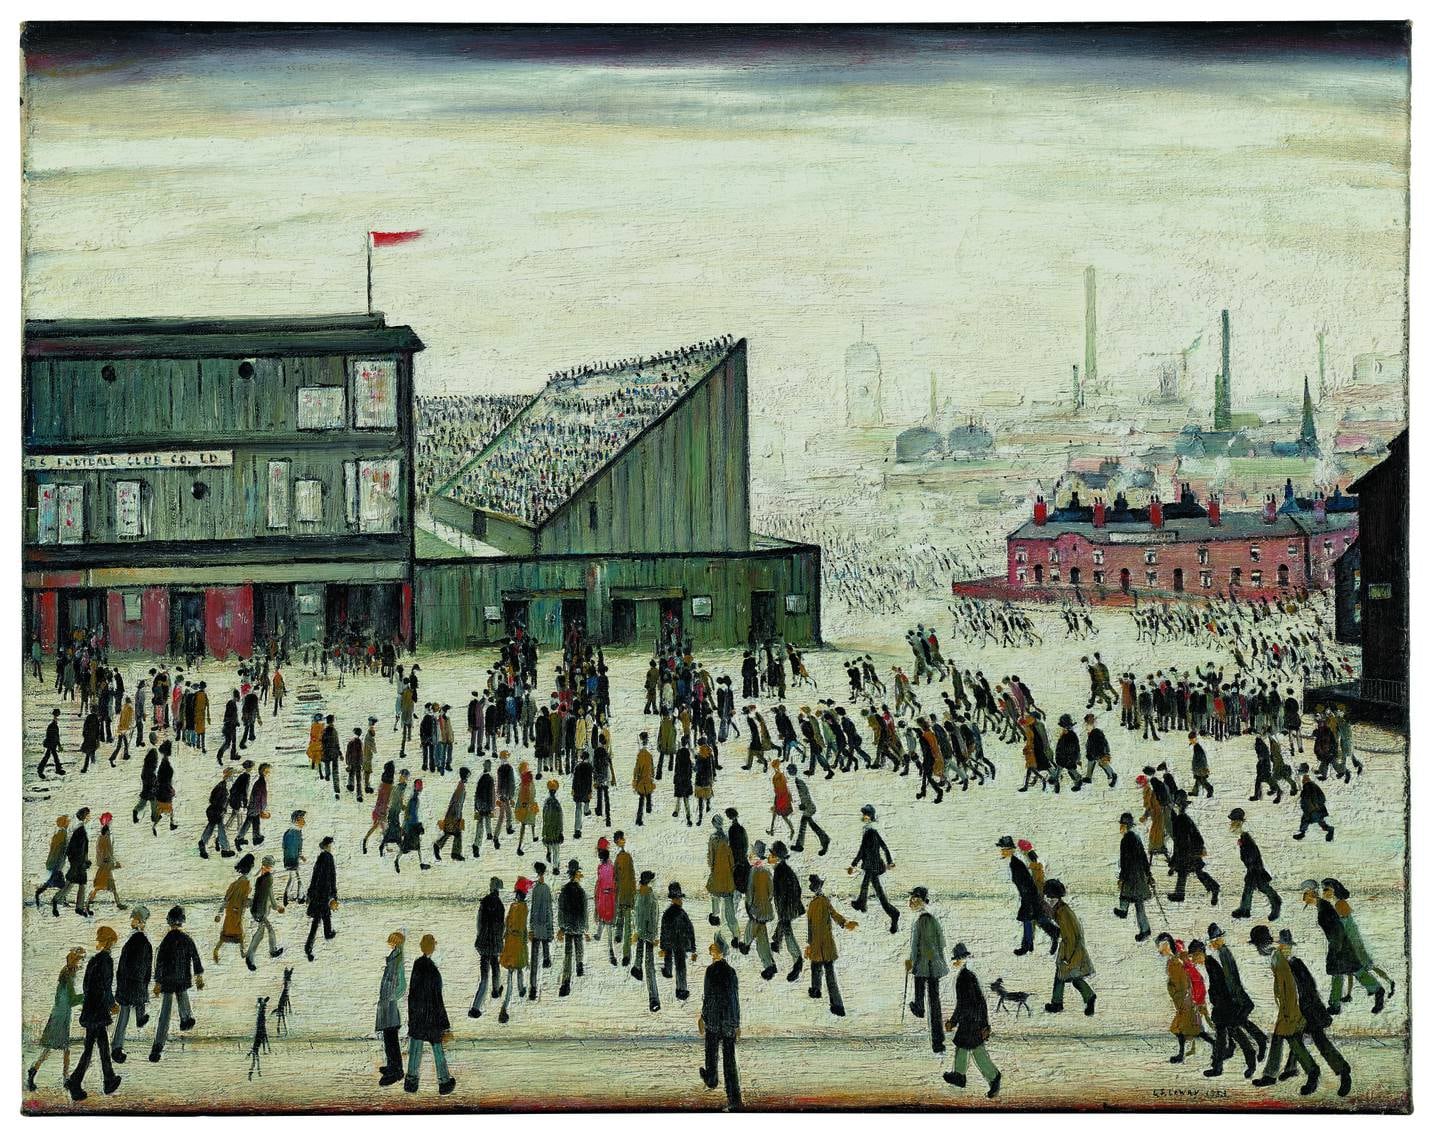  Lowry trained at Salford School of Art and Municipal College of Art. Christie's